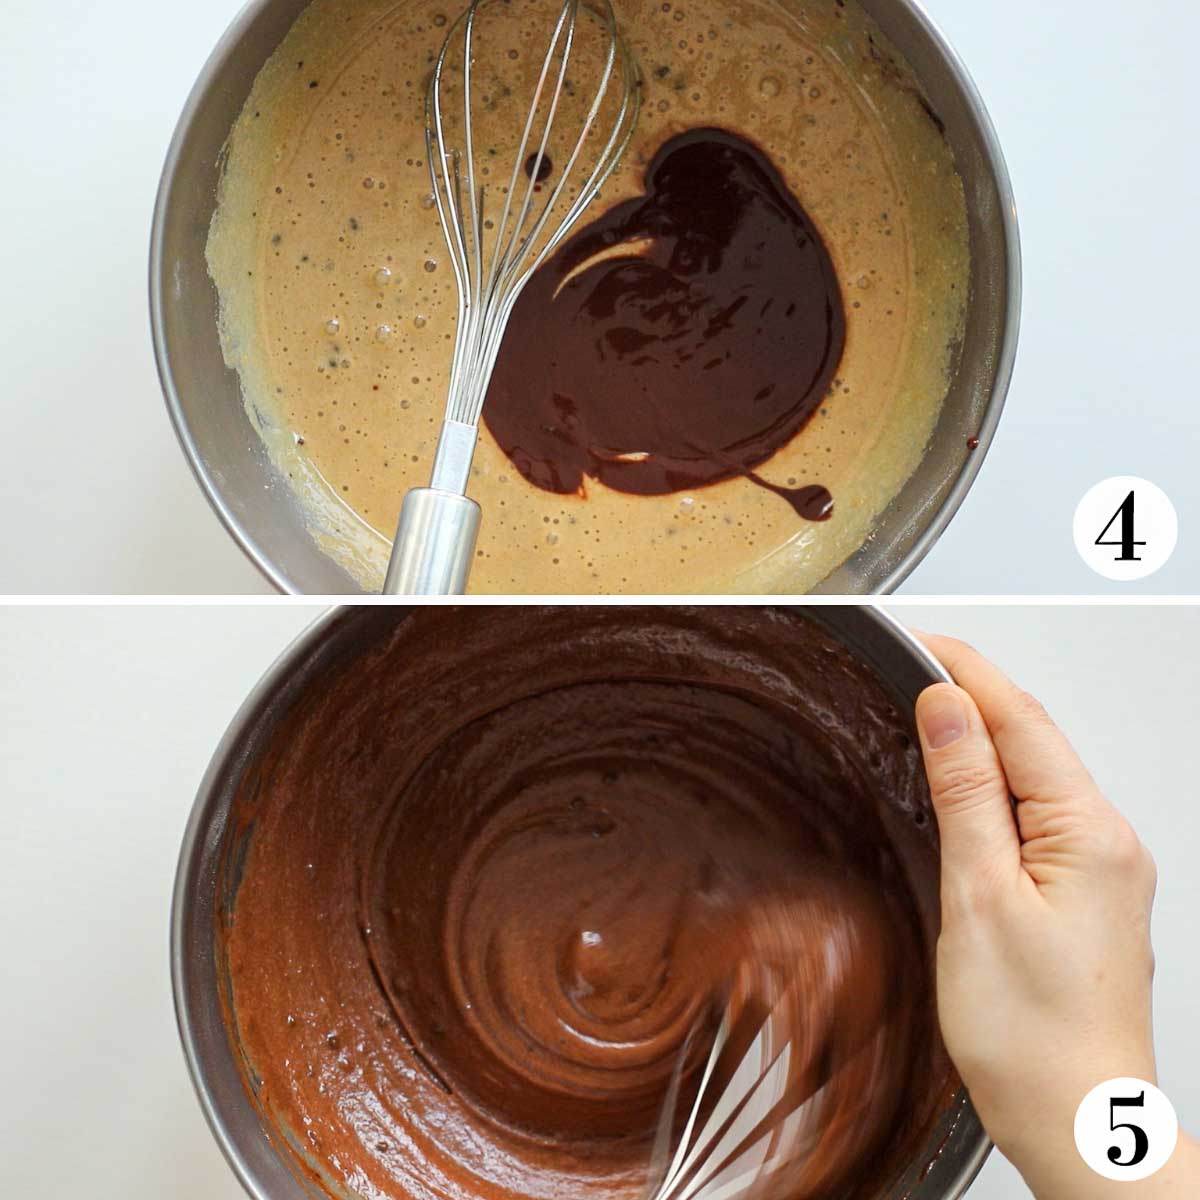 Mixing sugar mixture with chocolate mixture, and mixing all ingredients of the recipe.